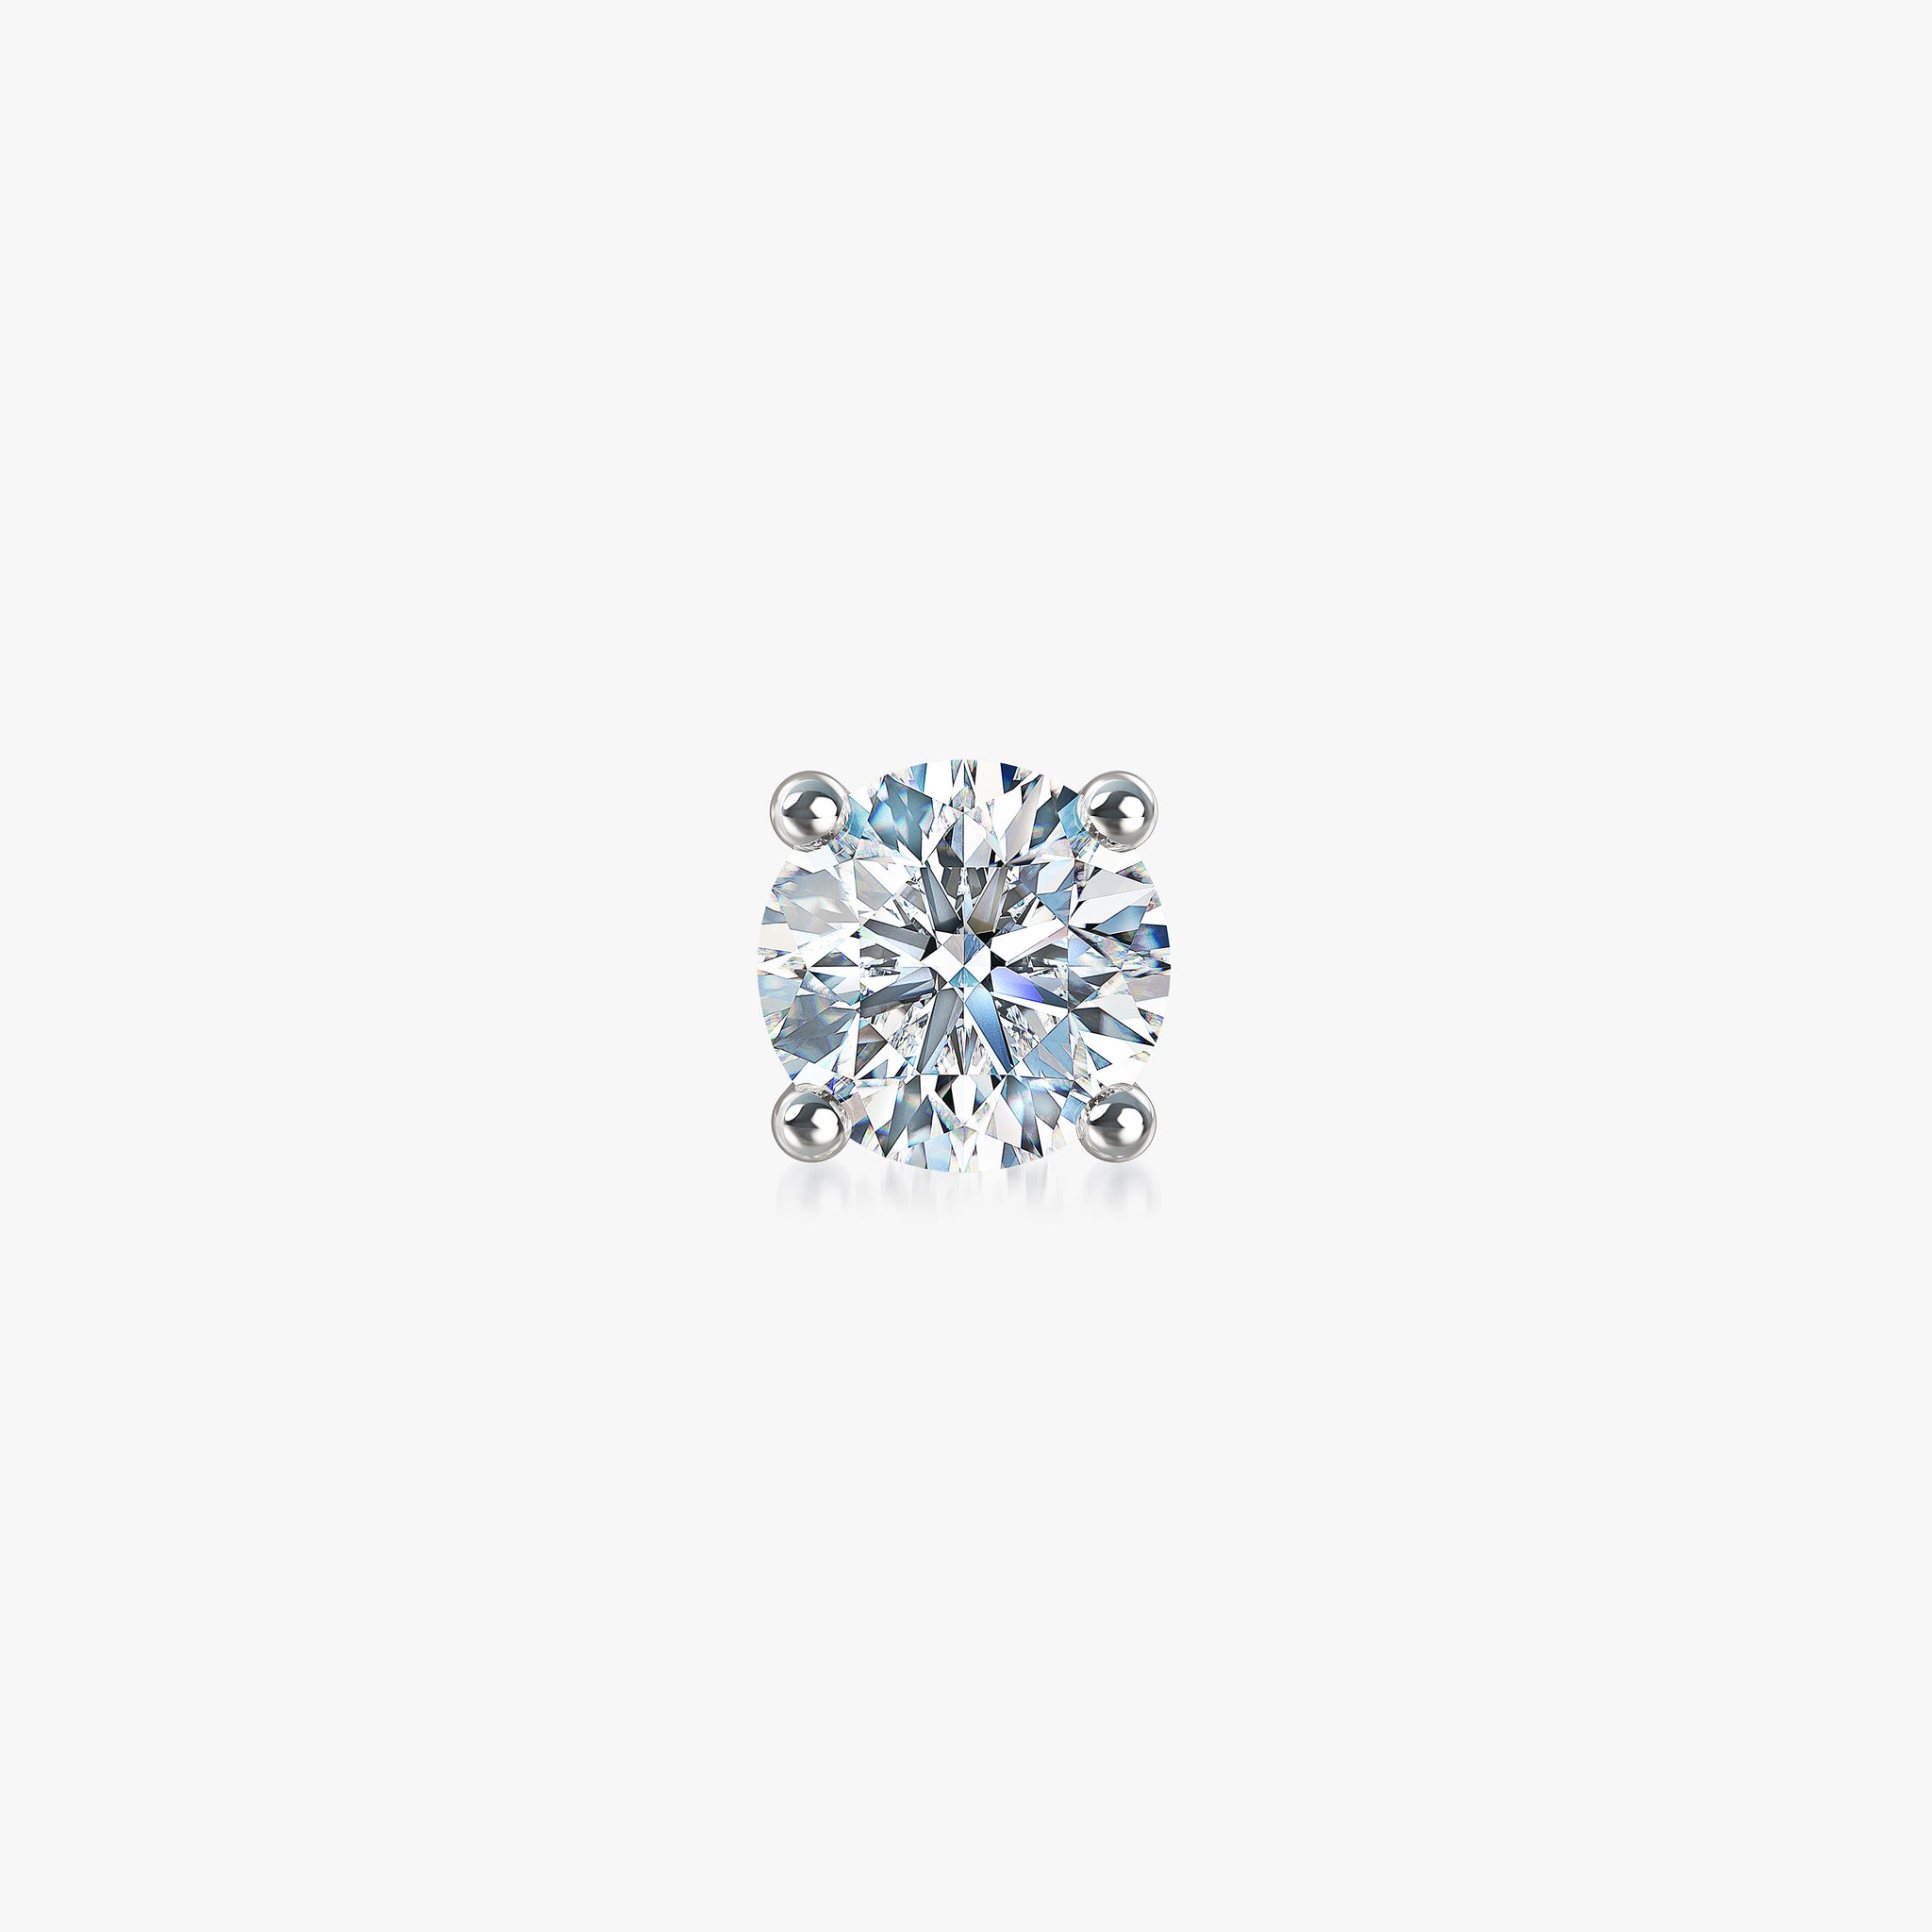 J'EVAR 18KT White Gold ALTR Lab Grown Diamond Single Stud Earring with Guardian Backs Front View